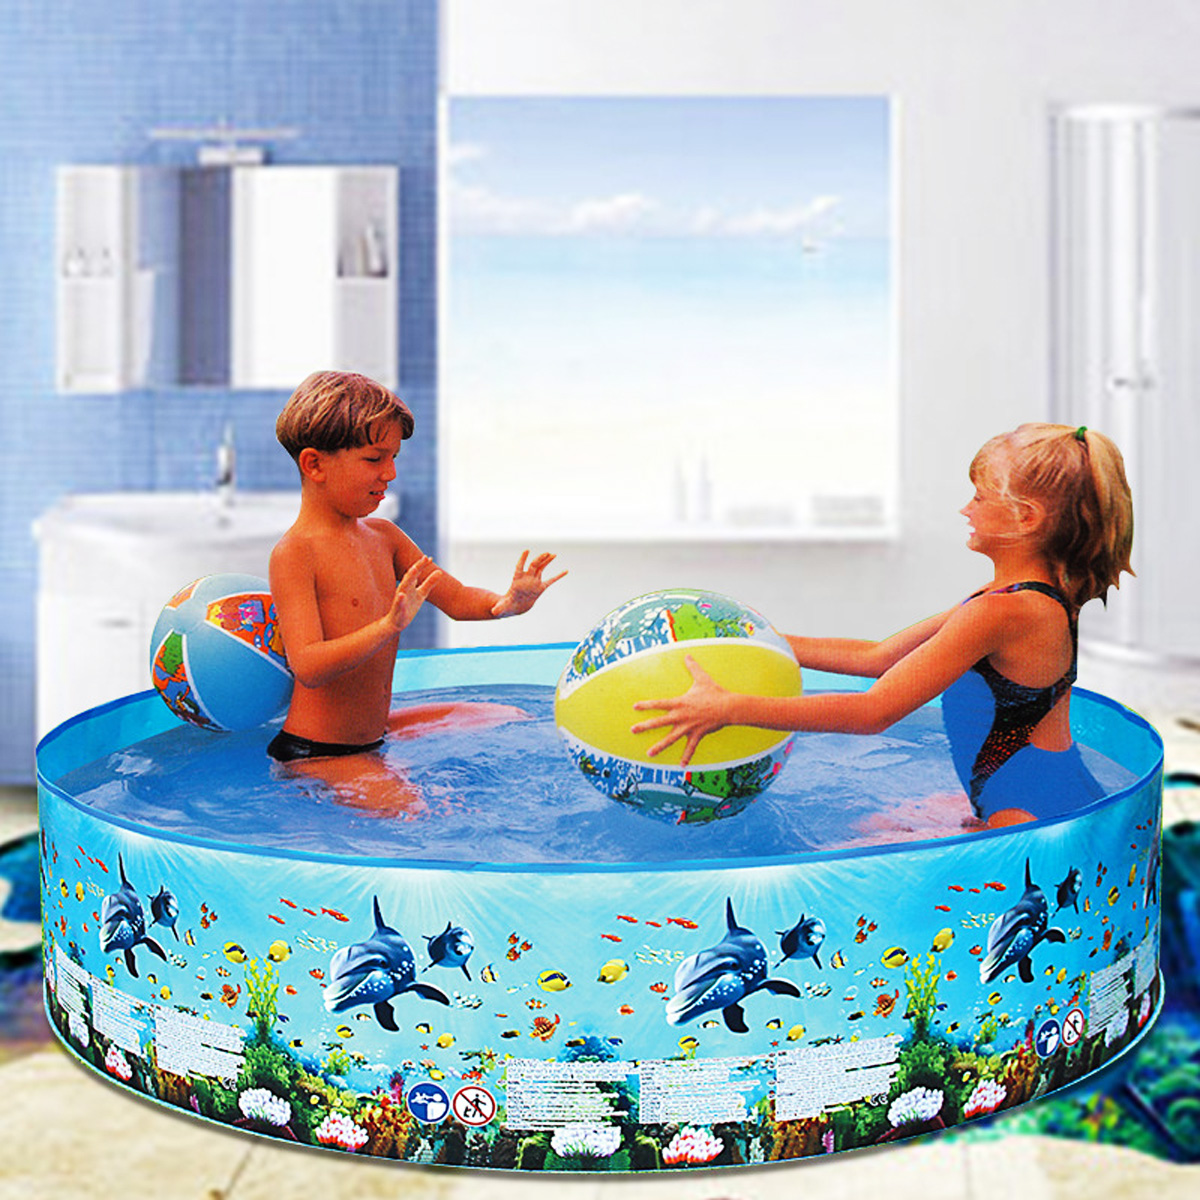 4' x 10" inch Pool Family Paddling Pool Swimming Pool, Garden Round Inflatable Baby Swimming Pool, Portable Inflatable Child / Children Pool - image 3 of 6